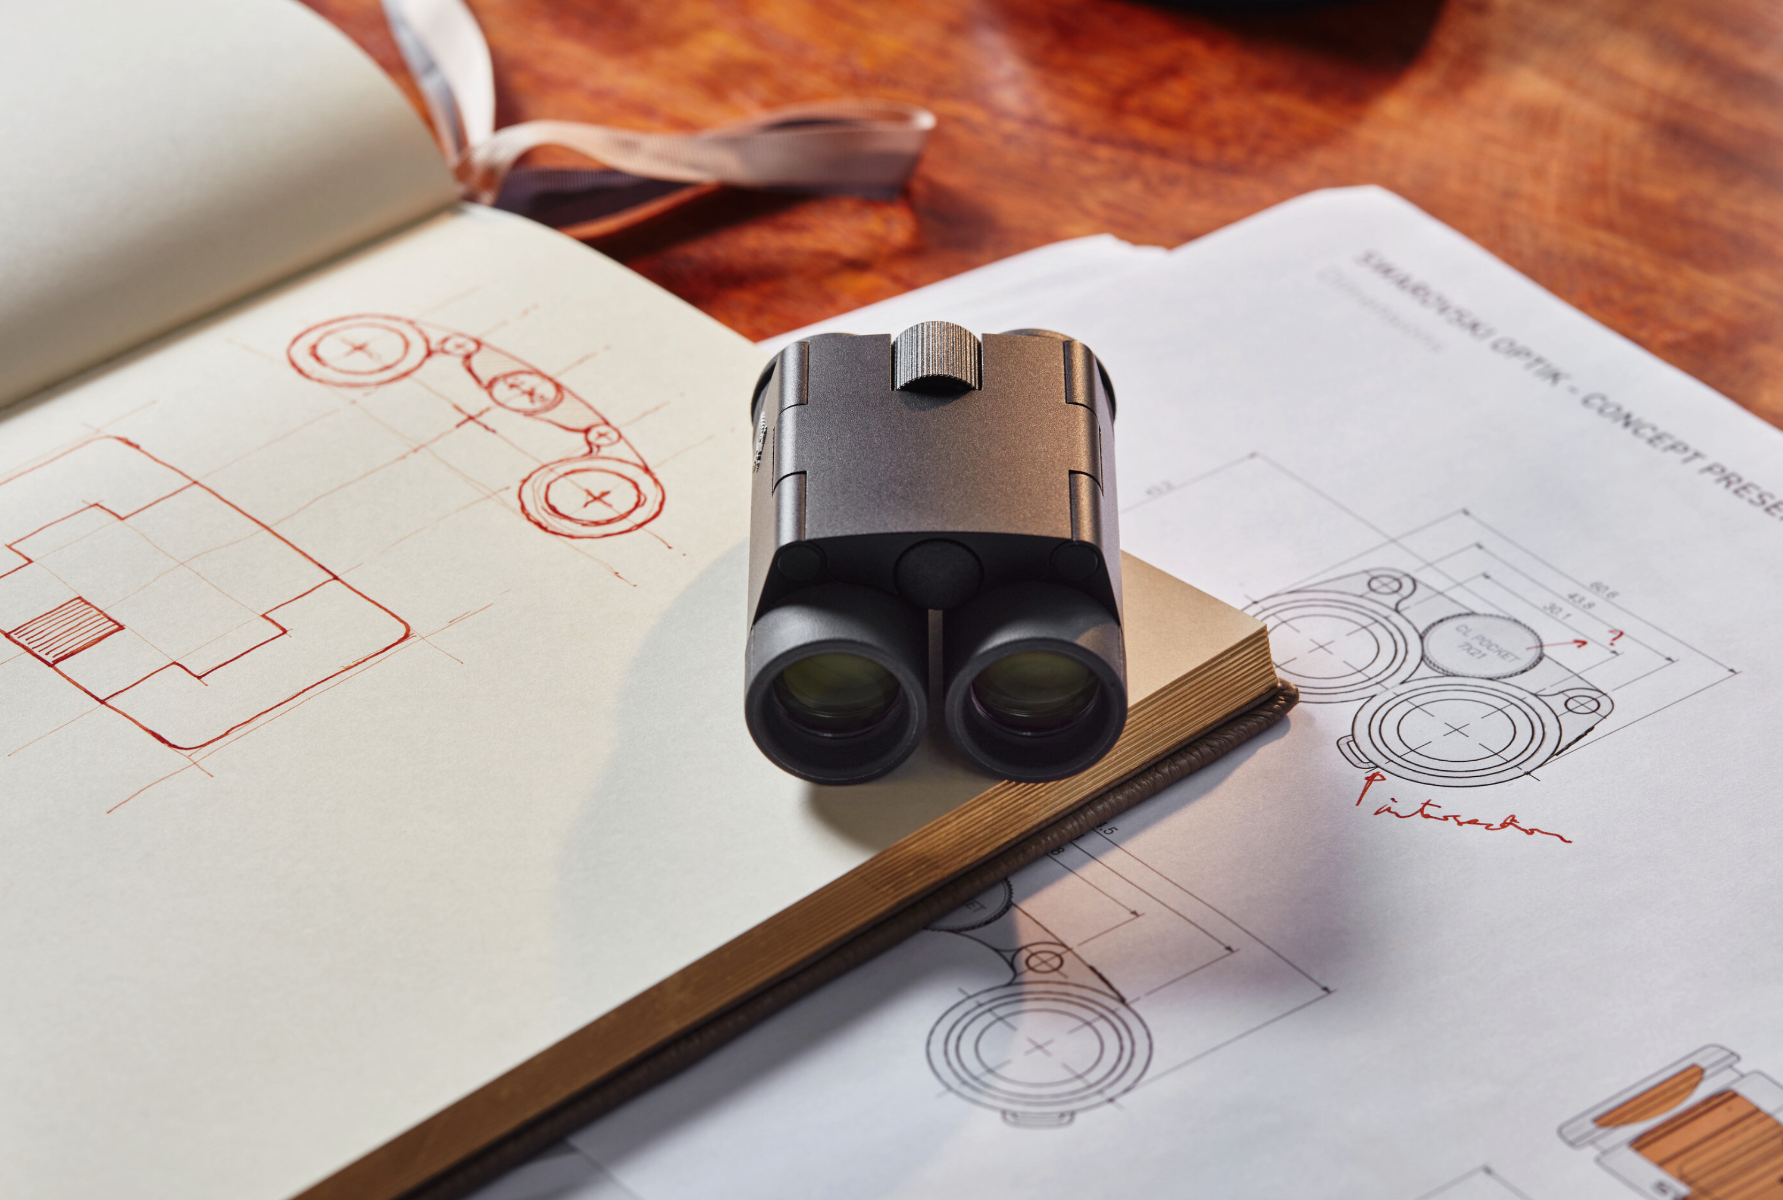 Swarovski 7x21 CL Curio compact binoculars - Black - Product Photo 5 - Front view of the binoculars folded whilst resting on a diagram sketched onto a paper notebook to show the scale